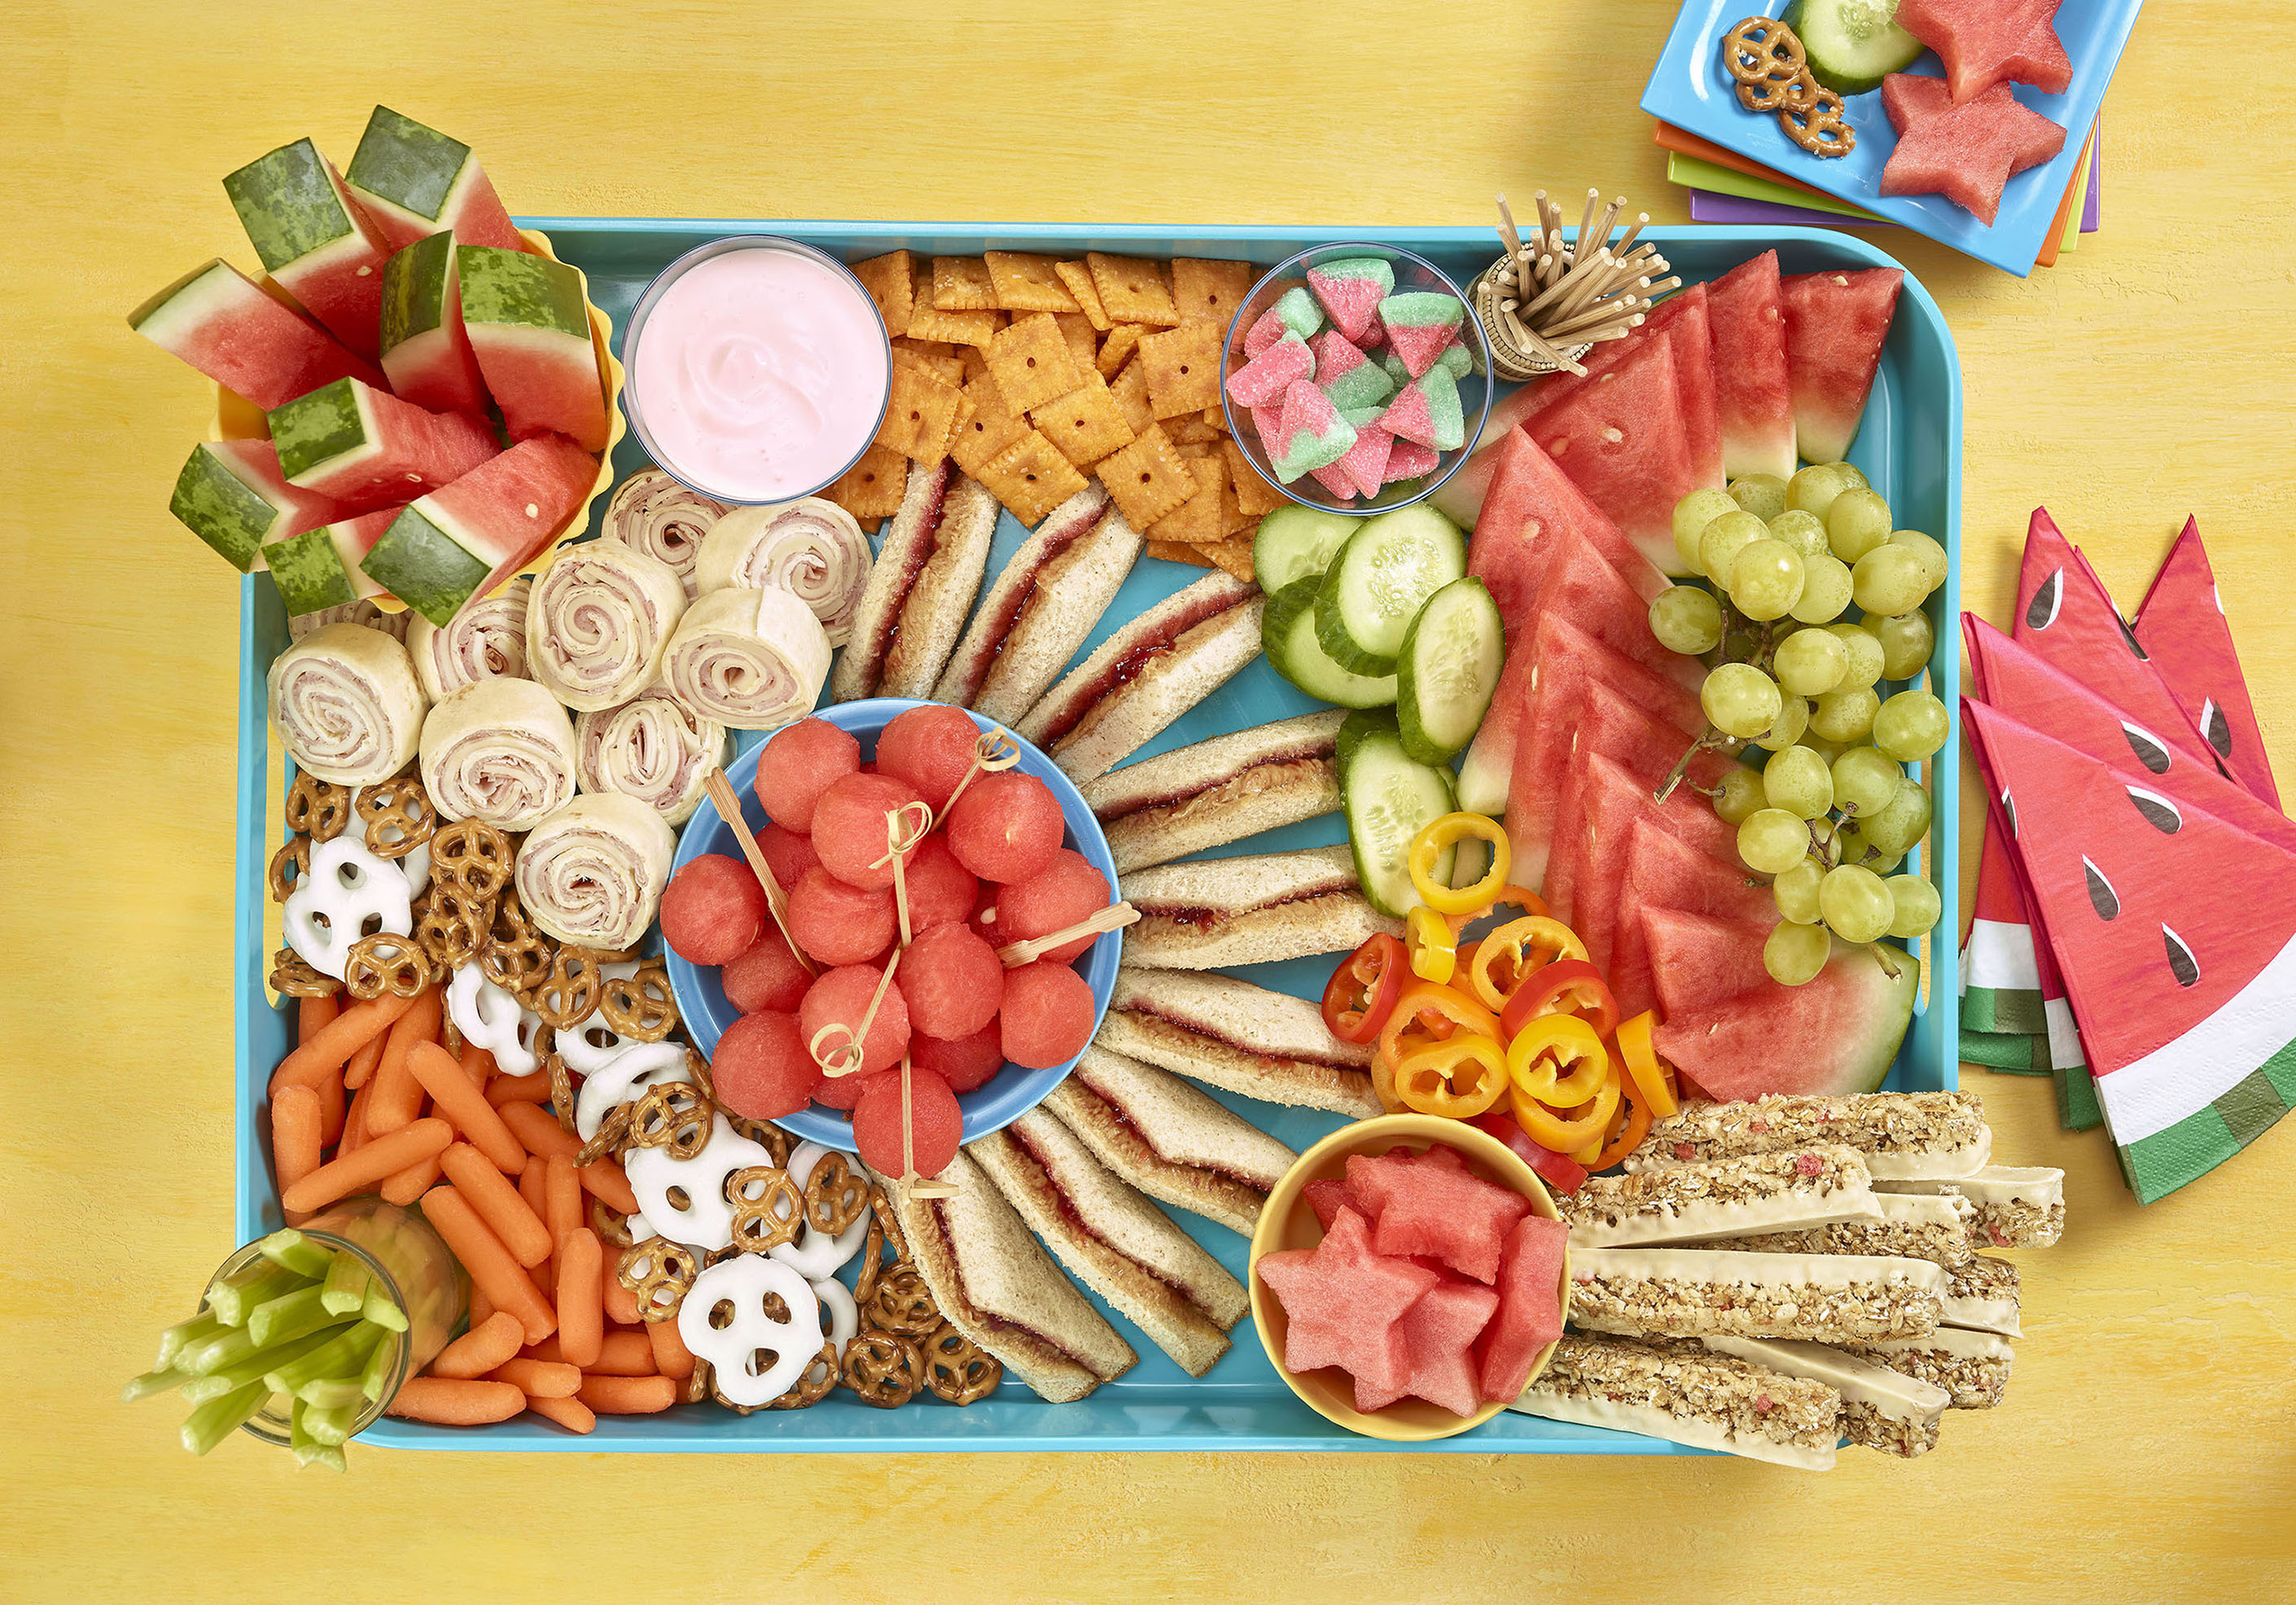 How To Make A Kid-Friendly Charcuterie Board